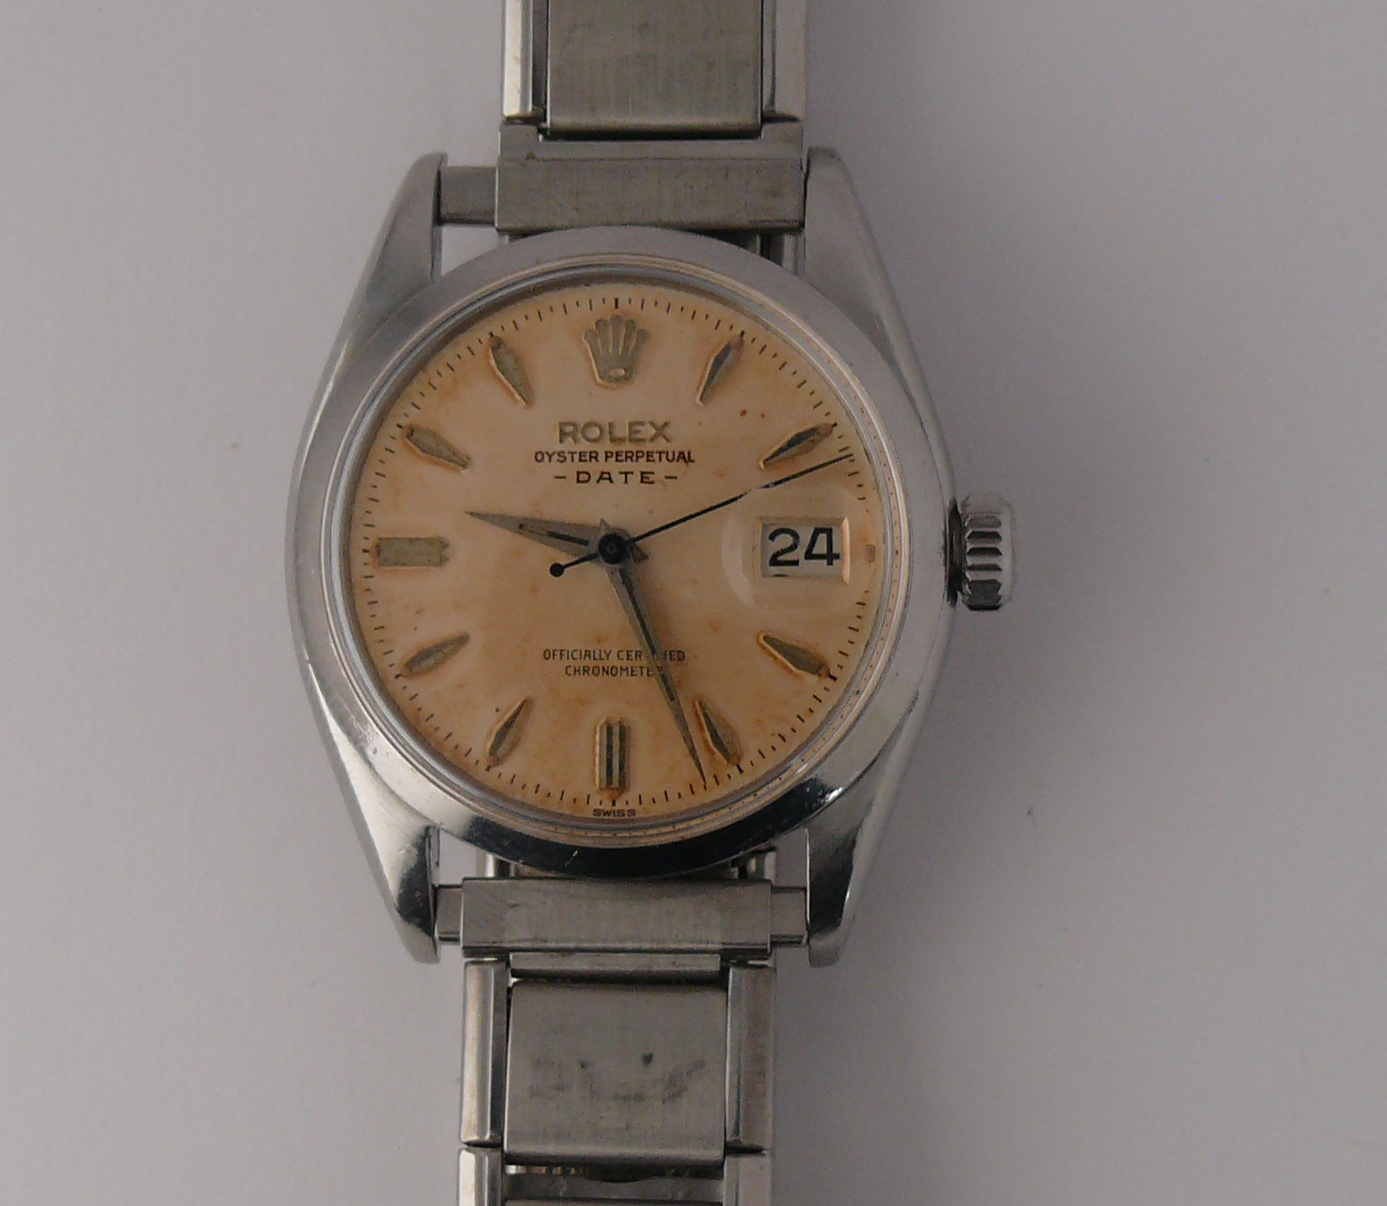 1958 Gents Rolex Oyster Perpetual Date Ref 6534, all original, serial & model numbers easily legible